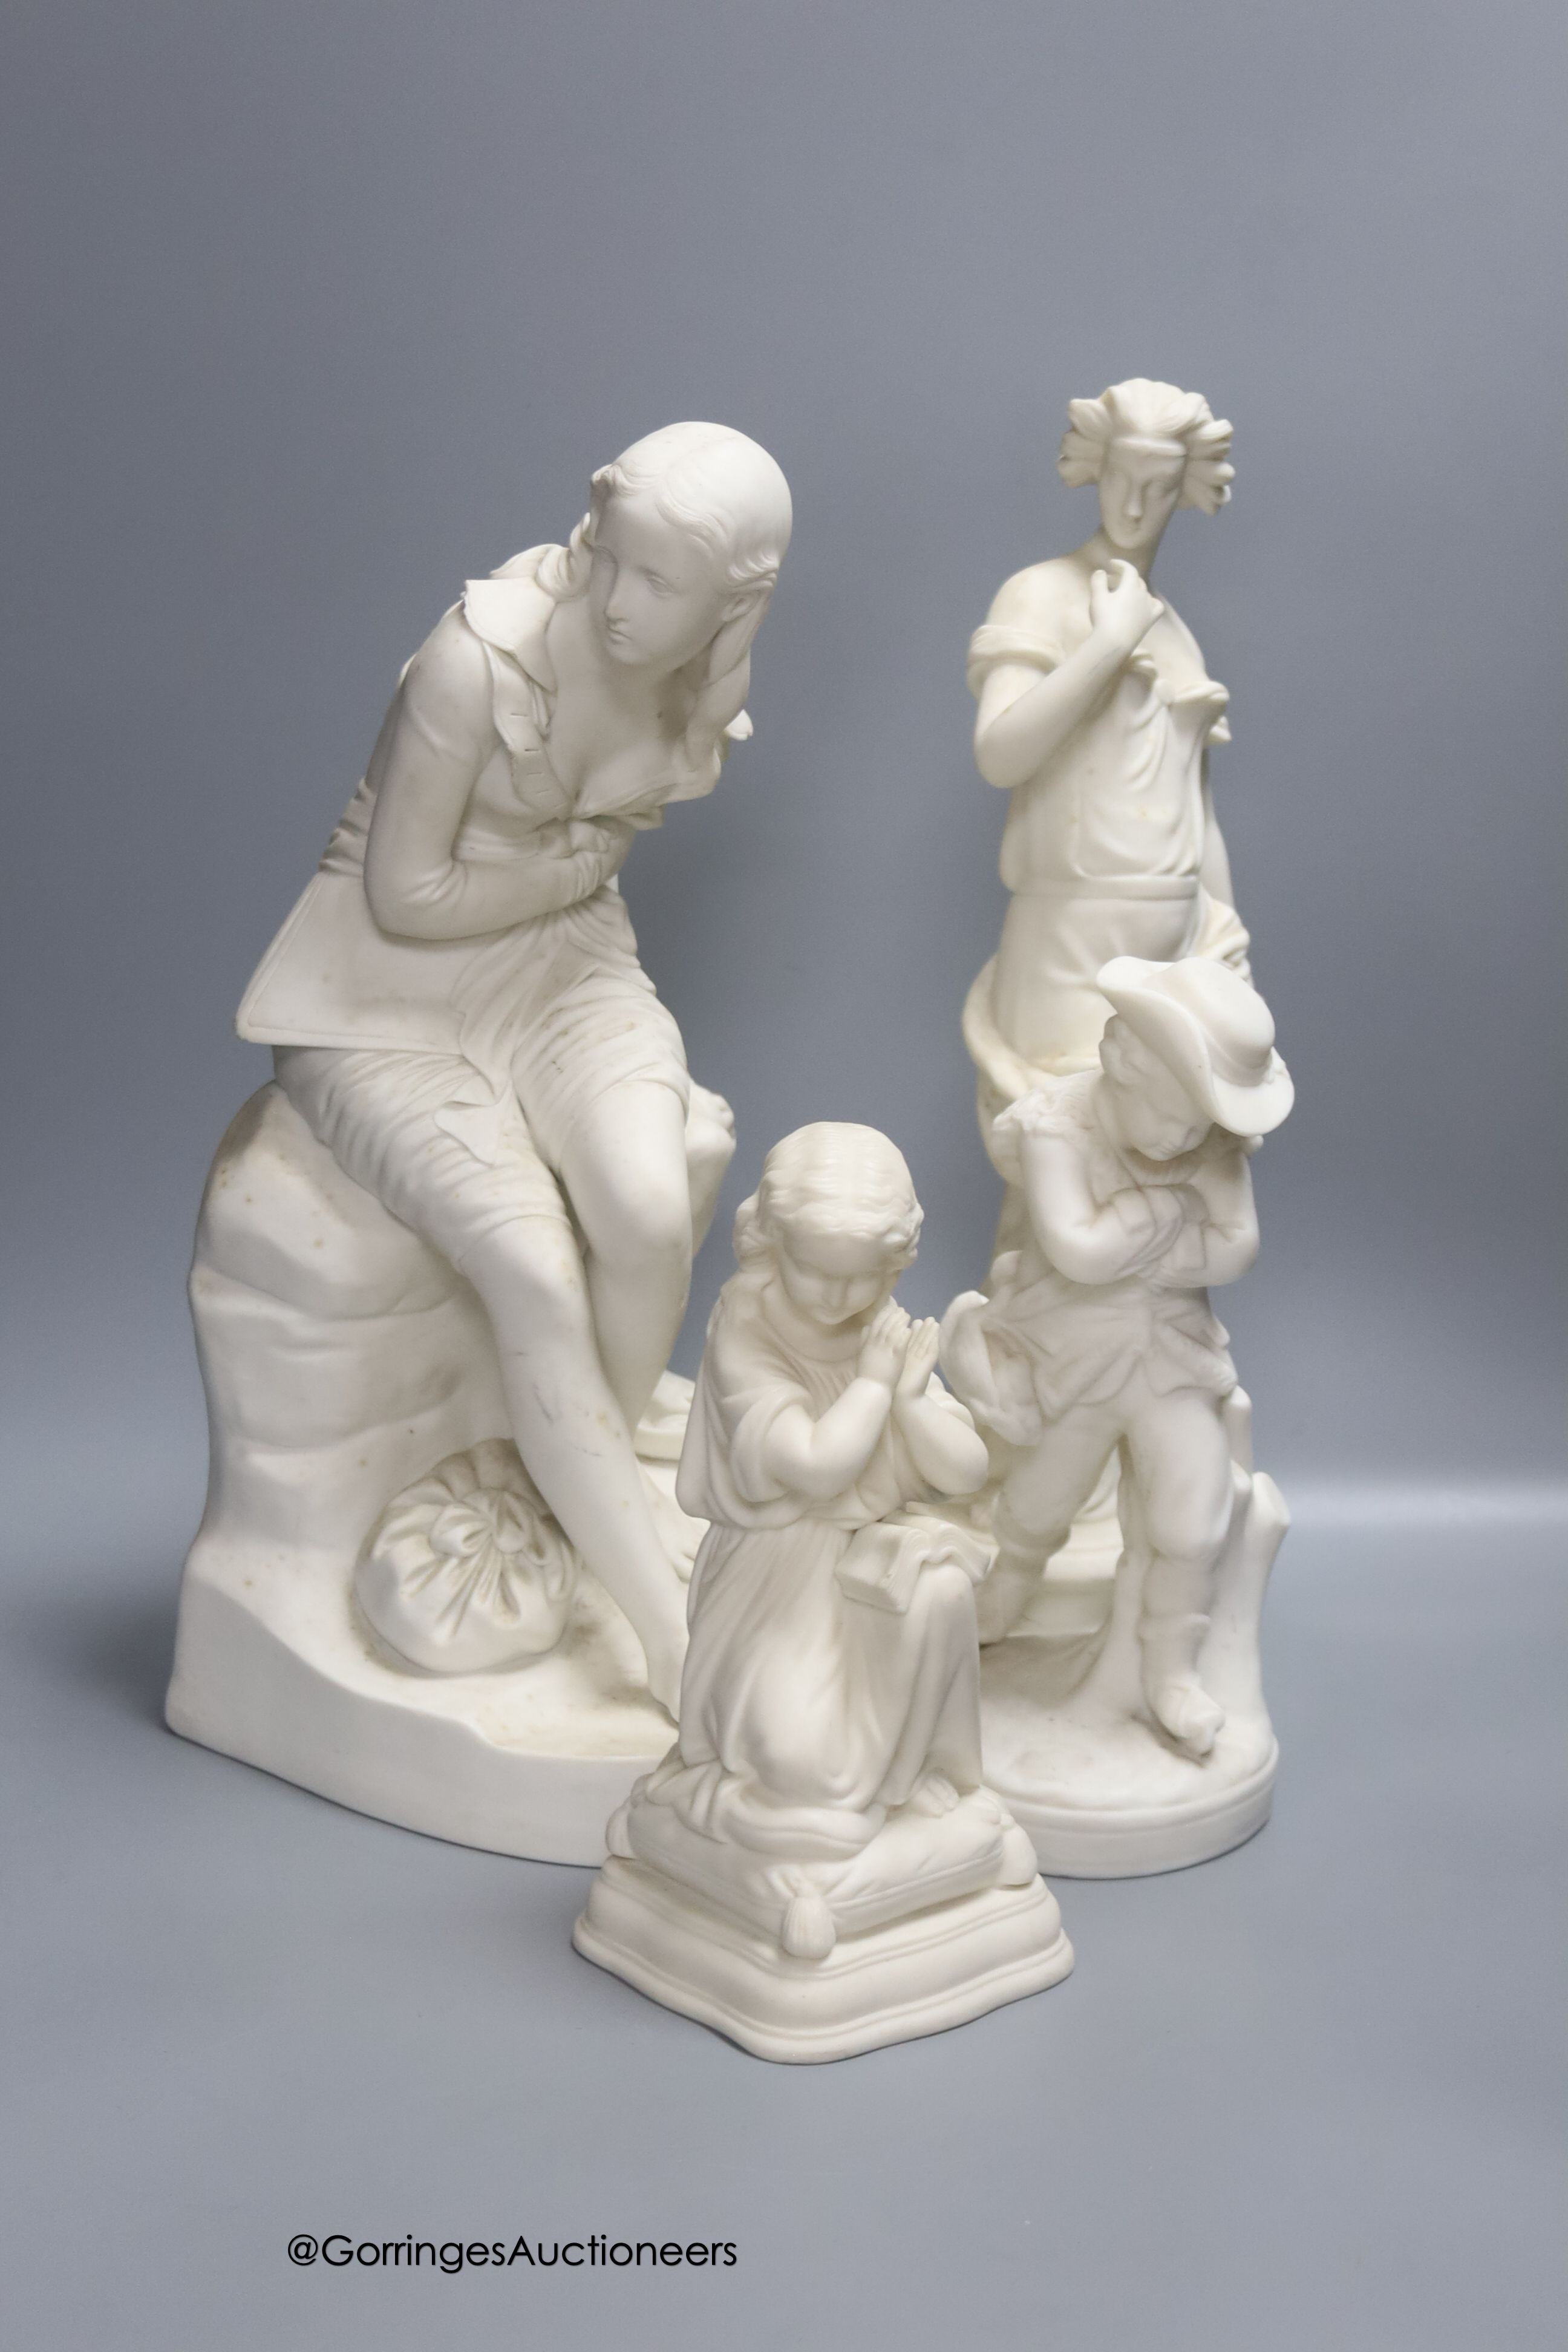 A Minton Parian Ware figure of 'Dorothea' by John Bell, bearing impressed marks to base and three other Parian figures, H 35cm (largest)                                                                                    